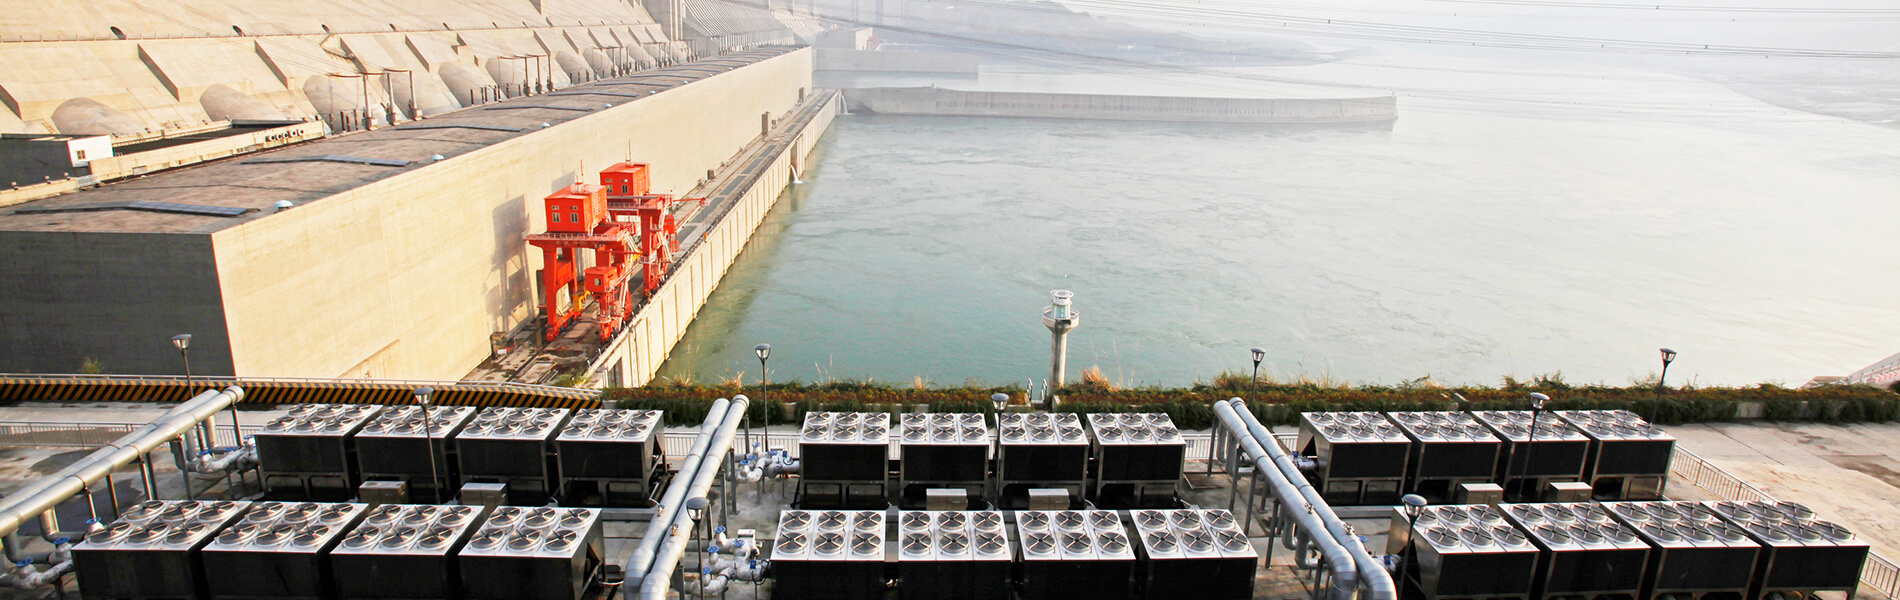 Three Gorges Hydropower Project